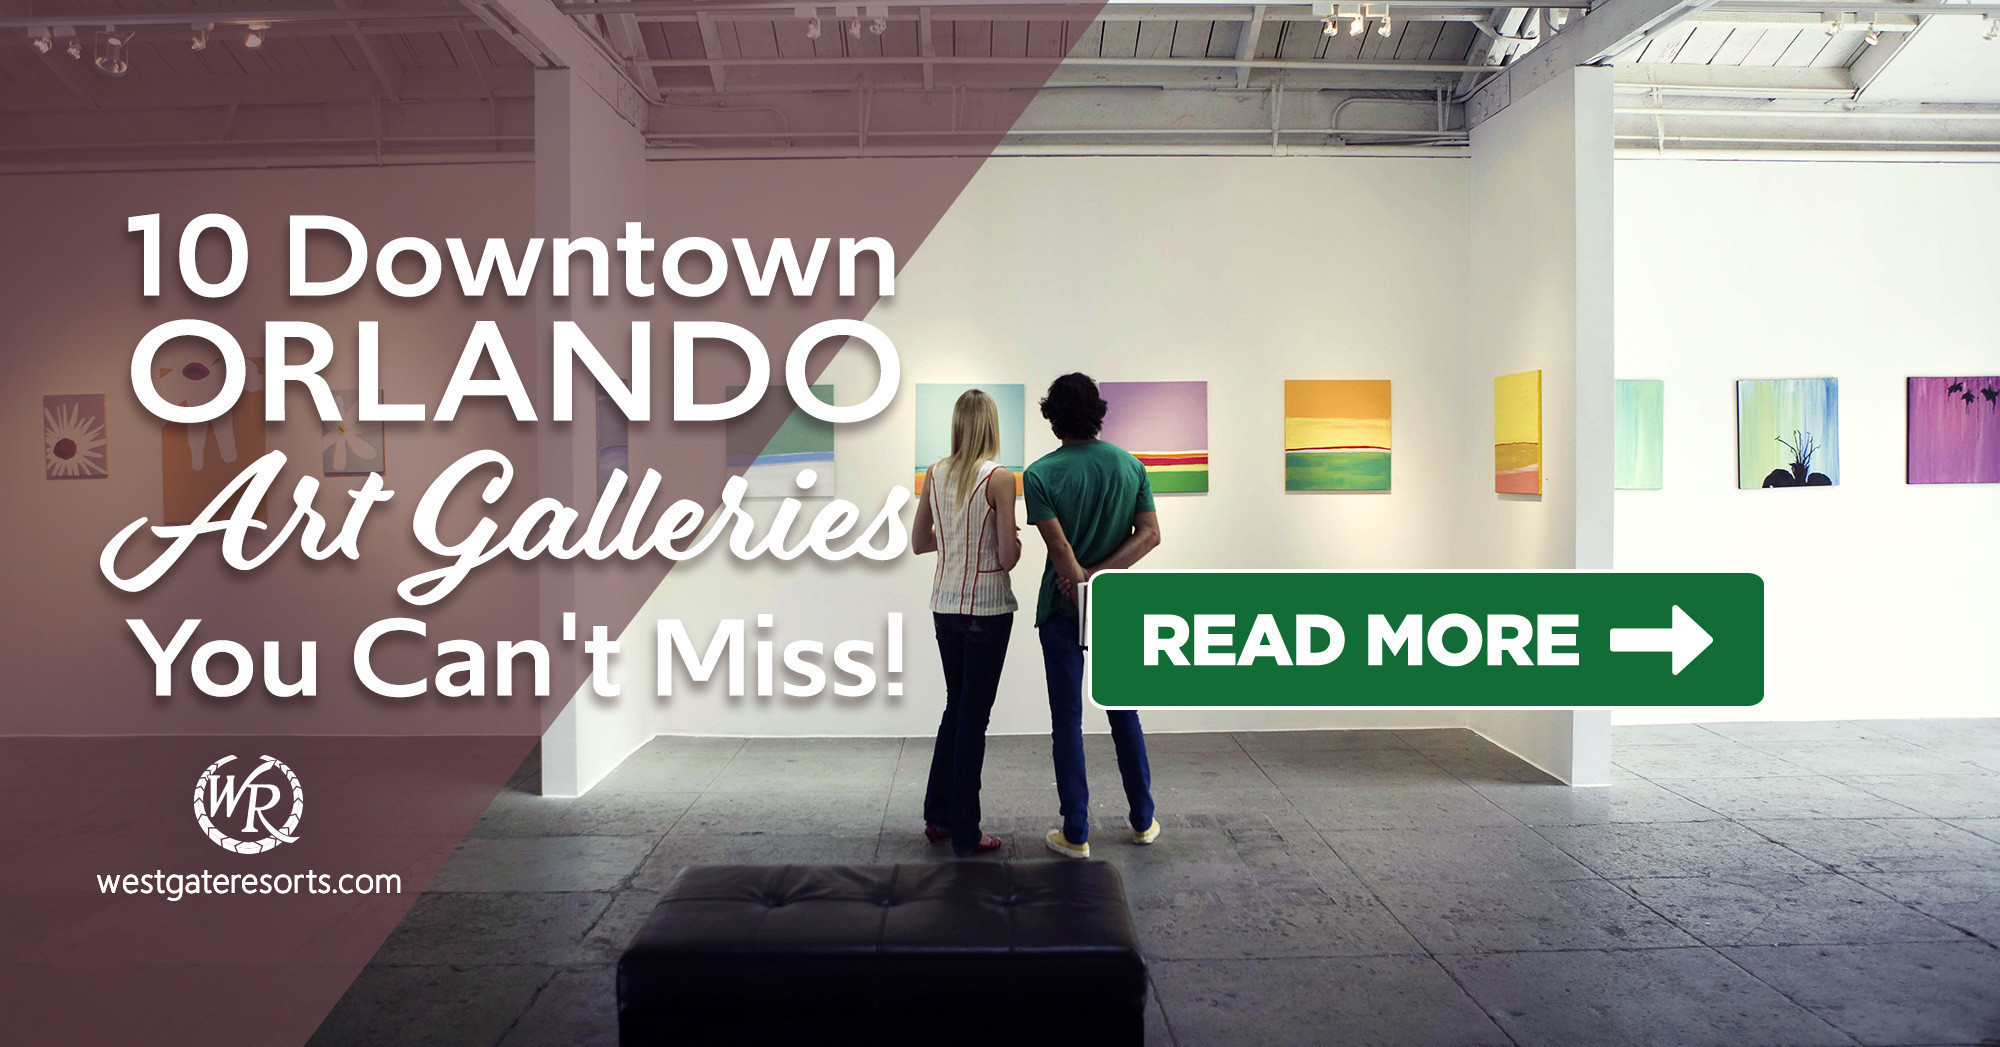  10 Downtown Orlando Art Galleries You Can't Miss! 